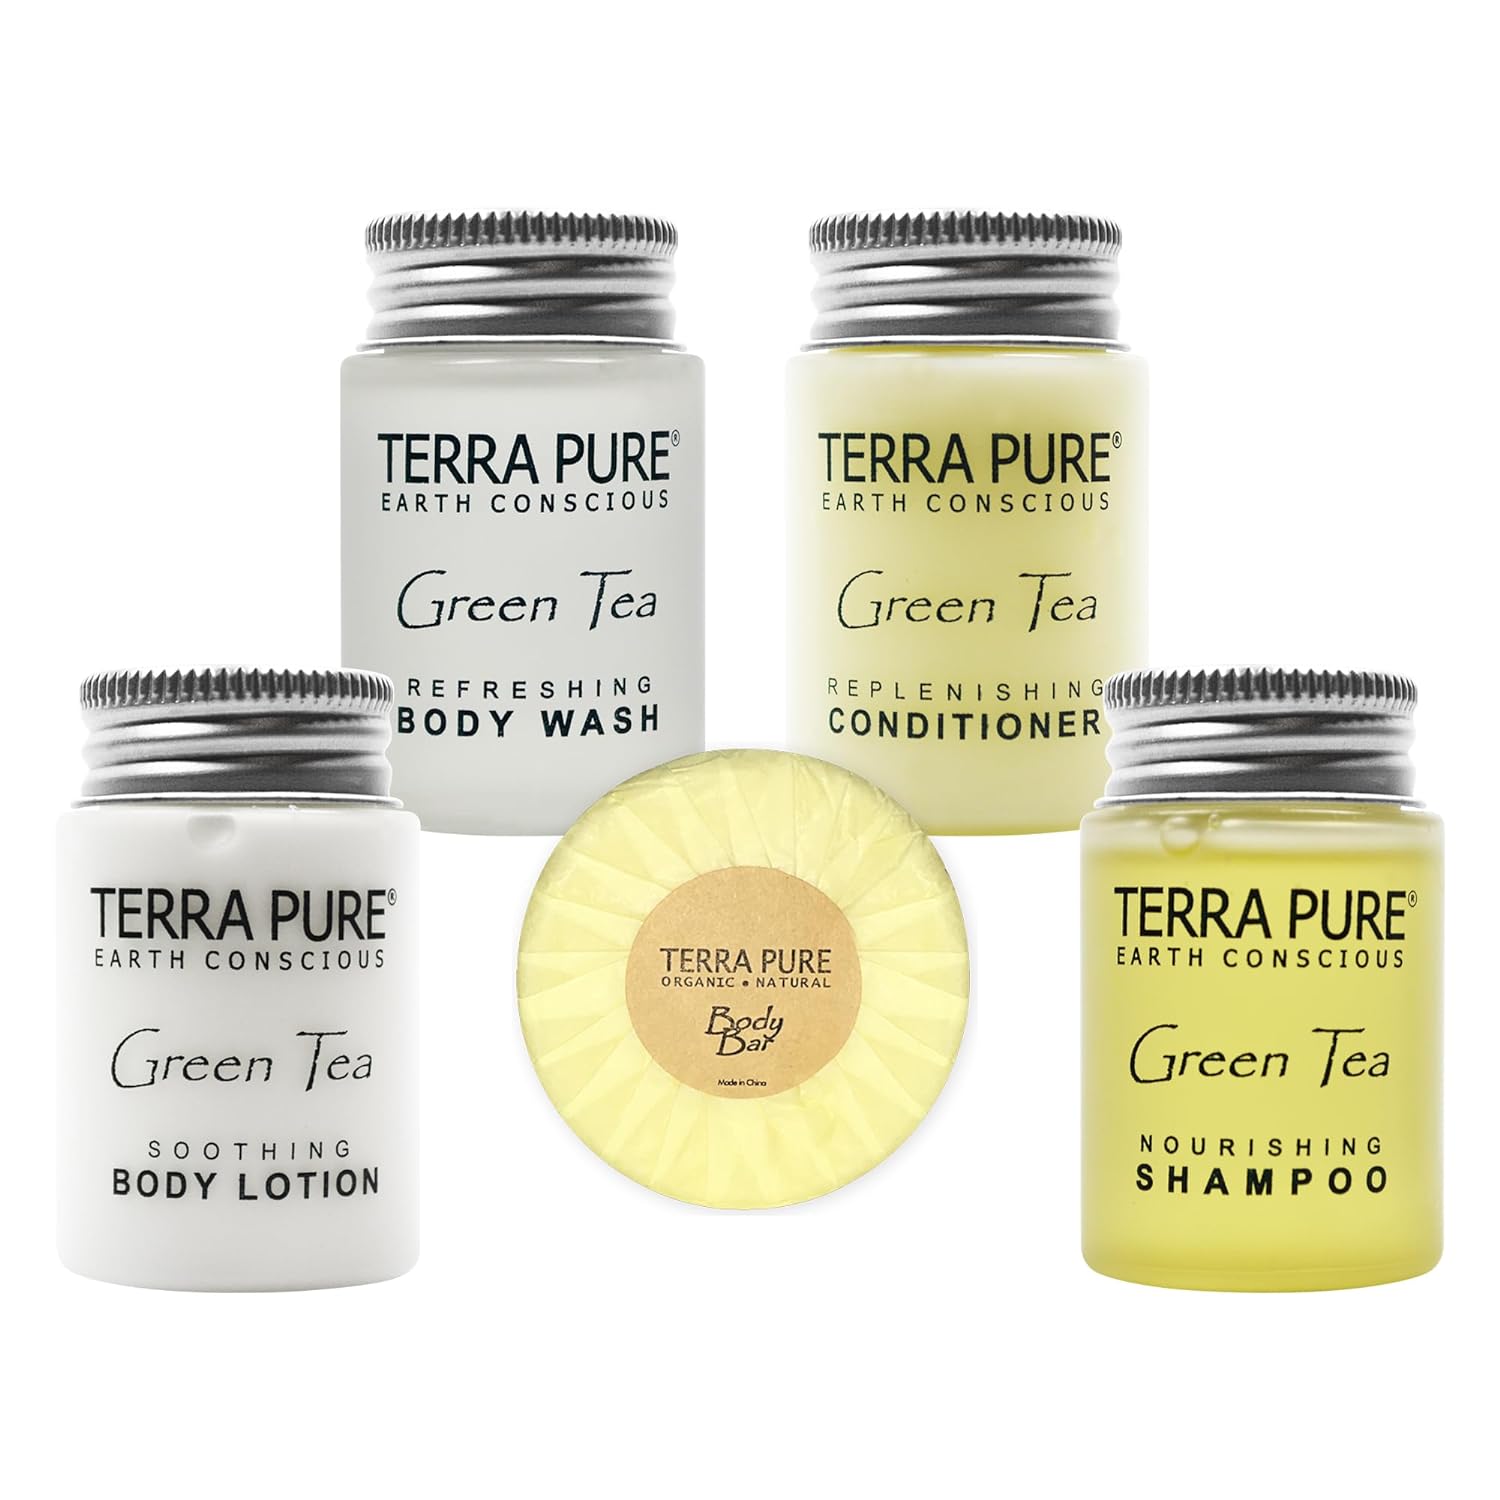 Terra Pure Hotel Soaps and Toiletries Bulk Set | 1-Shoppe All-In-Kit Amenities for Hotels | 1 Hotel Shampoo & Conditioner, Body Wash, Body Lotion & 1.25 Bar Soap Travel Size | 150 Pieces